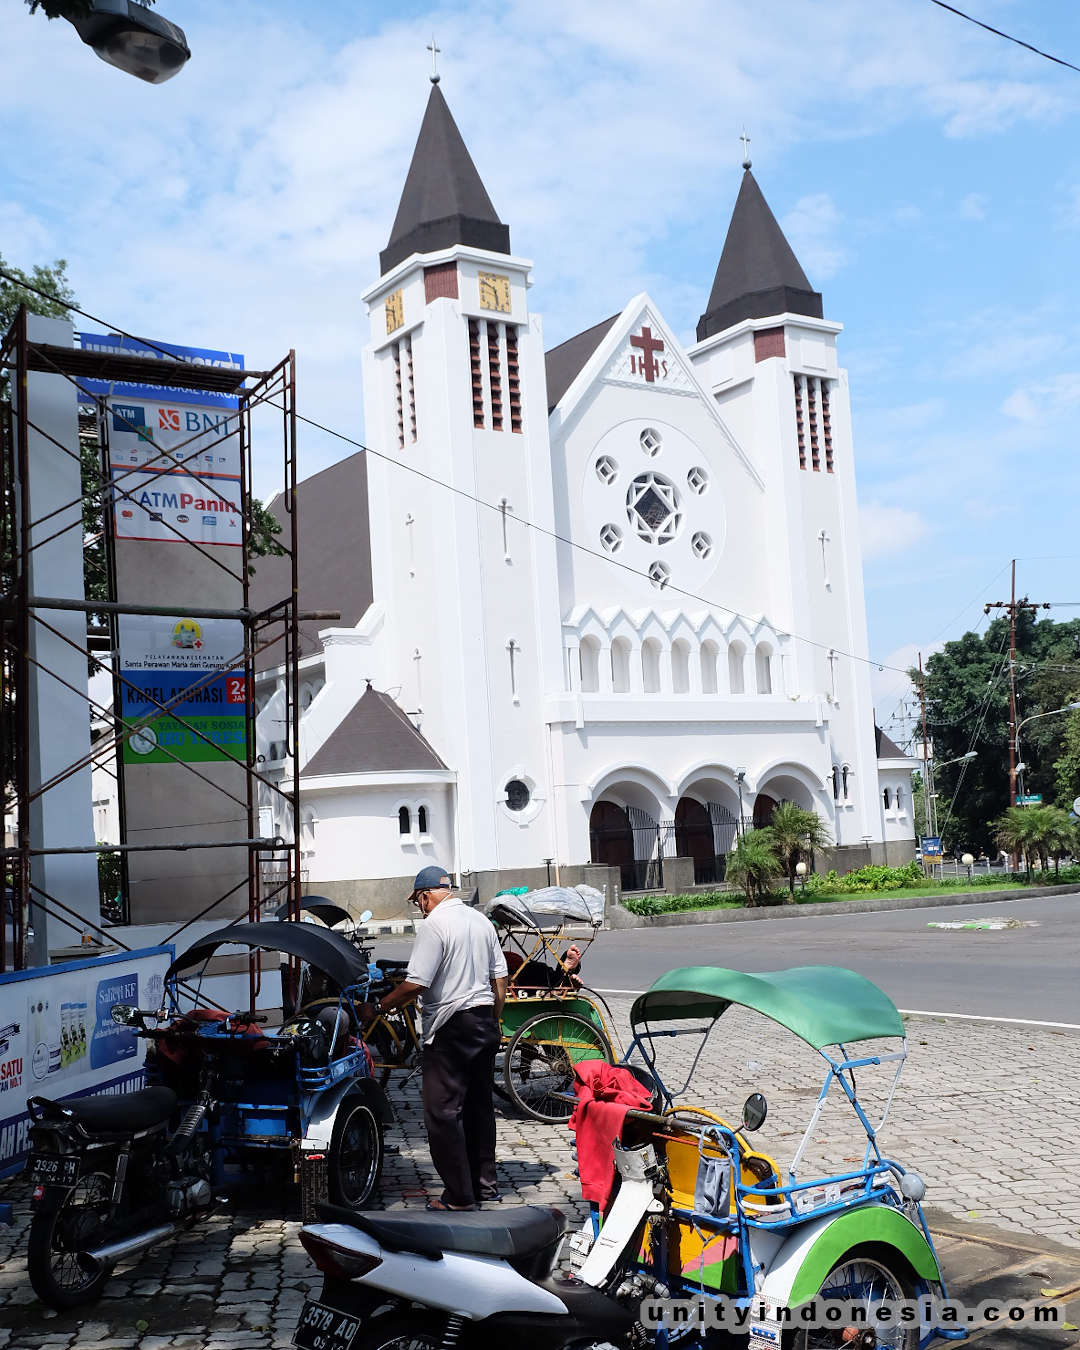 Christian cathedral in Boulevard Ijen, Malang, Indonesia.